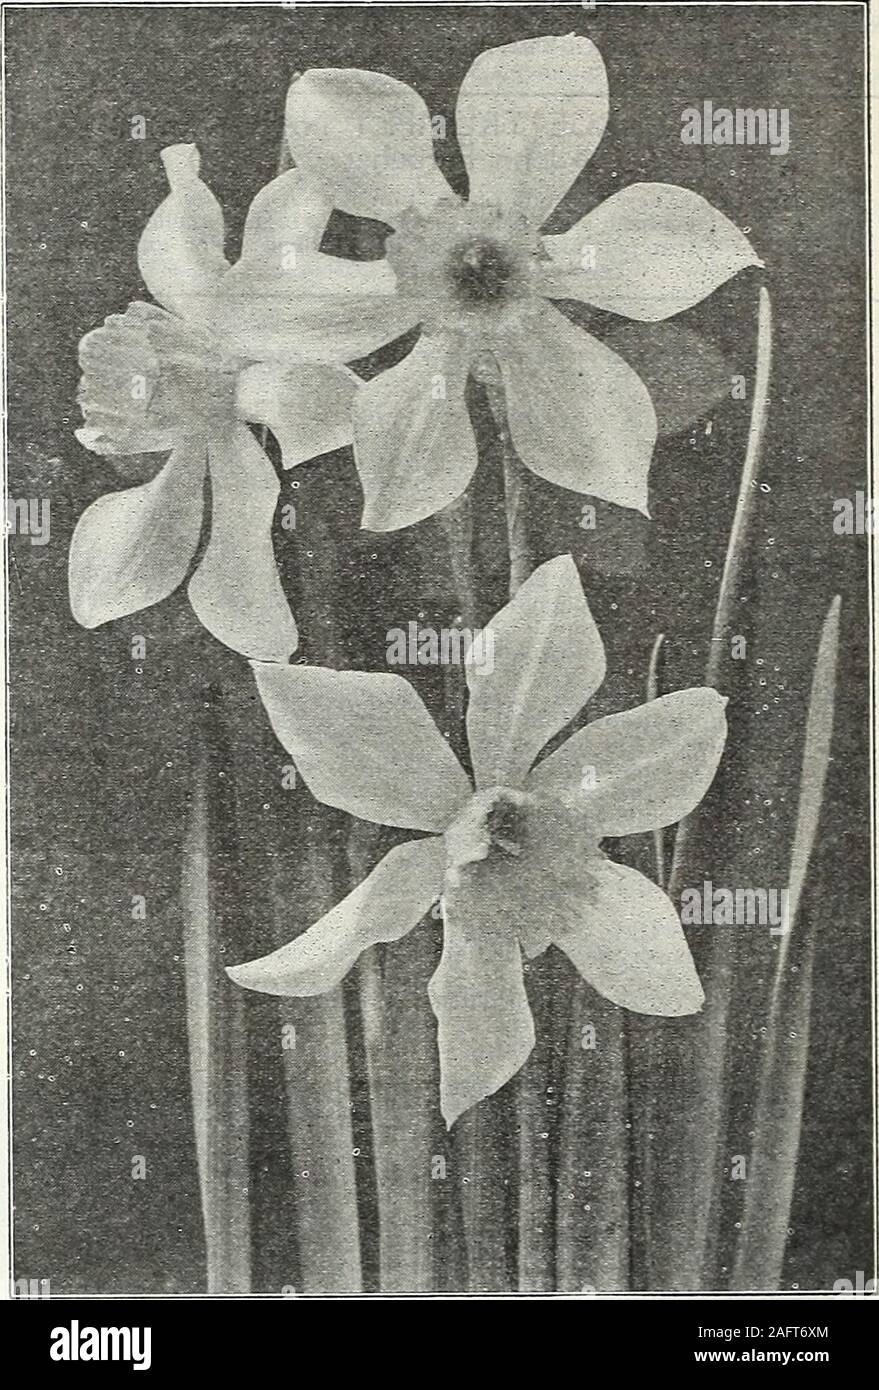 . Farquhar's autumn catalogue : 1921. i Narcissus Incomparabilis, Sir Watkin. Narcissus Leedsii, Minnie Hume. INCOMPARABILIS DAFFODILS. {Narcissus Incomparabilis.) LARGE CHALICE.CUPPED OR STAR NARCISSI. Cup or crown measuring from one-third to nearly equal the lengthof the perianth segments. Autocrat. Large, full yellow perianth; cup yel-low, broad and well expanded Frank Miles. Handsome variety of soft, clearyellow; twisted perianth Gloria Mundi. A grand flower with clear yellowperianth; and broad, well-expanded orange-scarlet cup Lucifer. Perianth white; cup an intense, glowingorange-red Sim Stock Photo